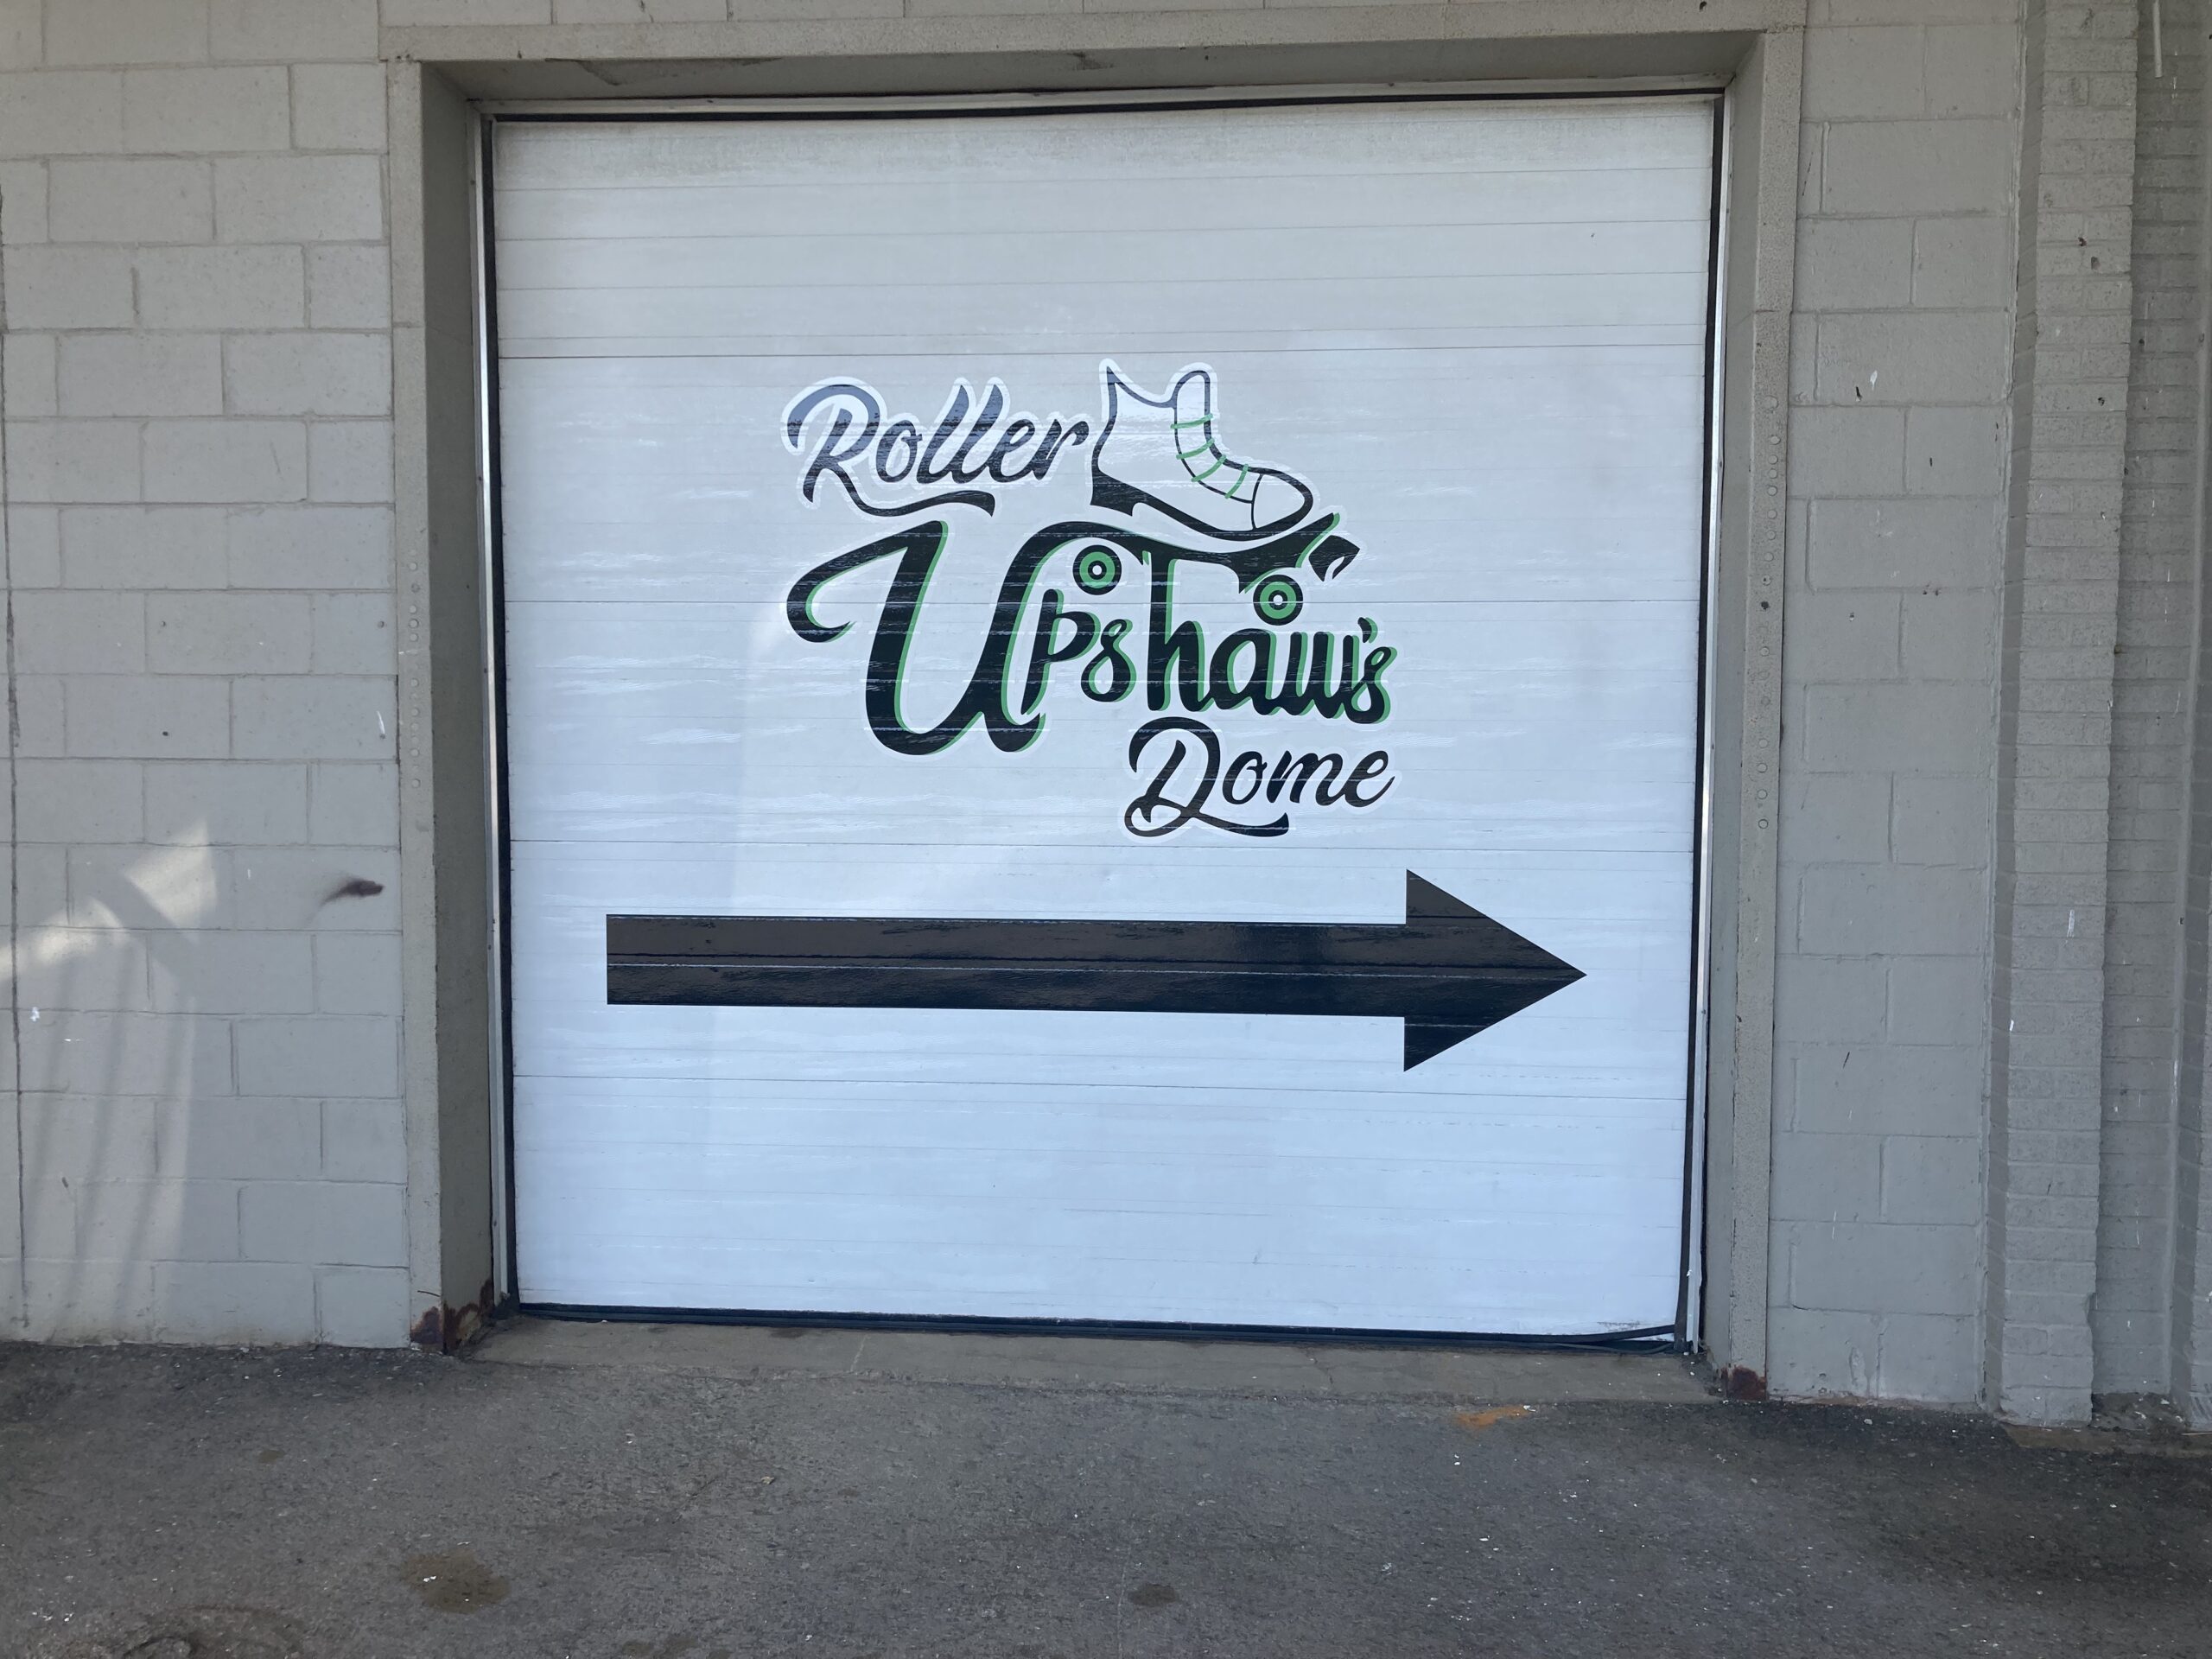 A white garage door painted with Upshaw's Roller Dome and an image of a roller skate. A black arrow at the bottom points to the roller dome's entrance.